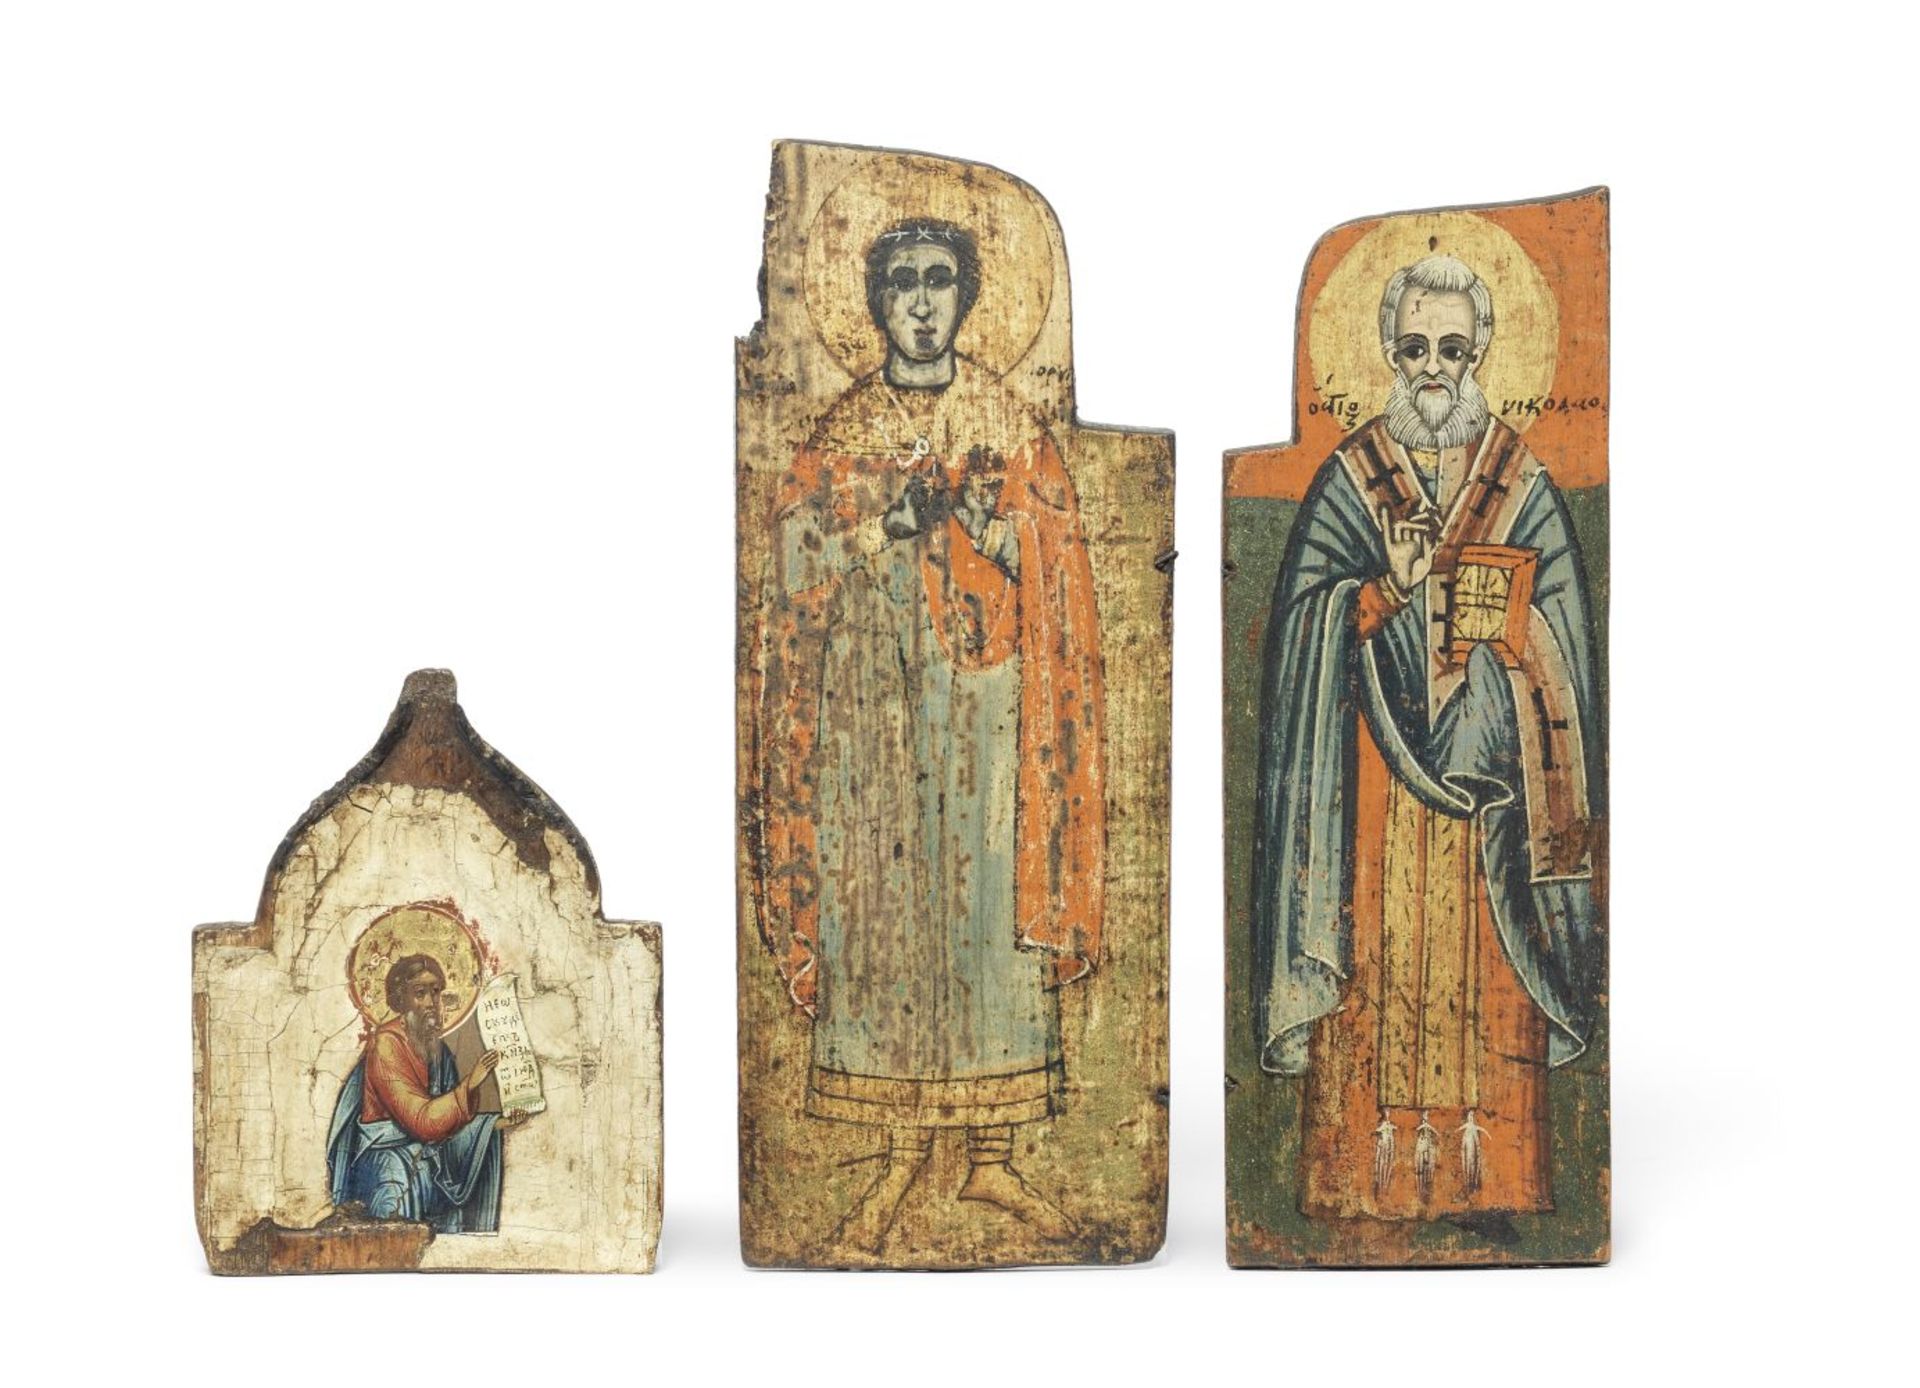 A RUSSIAN POLYCHROME DECORATED ICON Early 20th century, in the 17th century style (2)